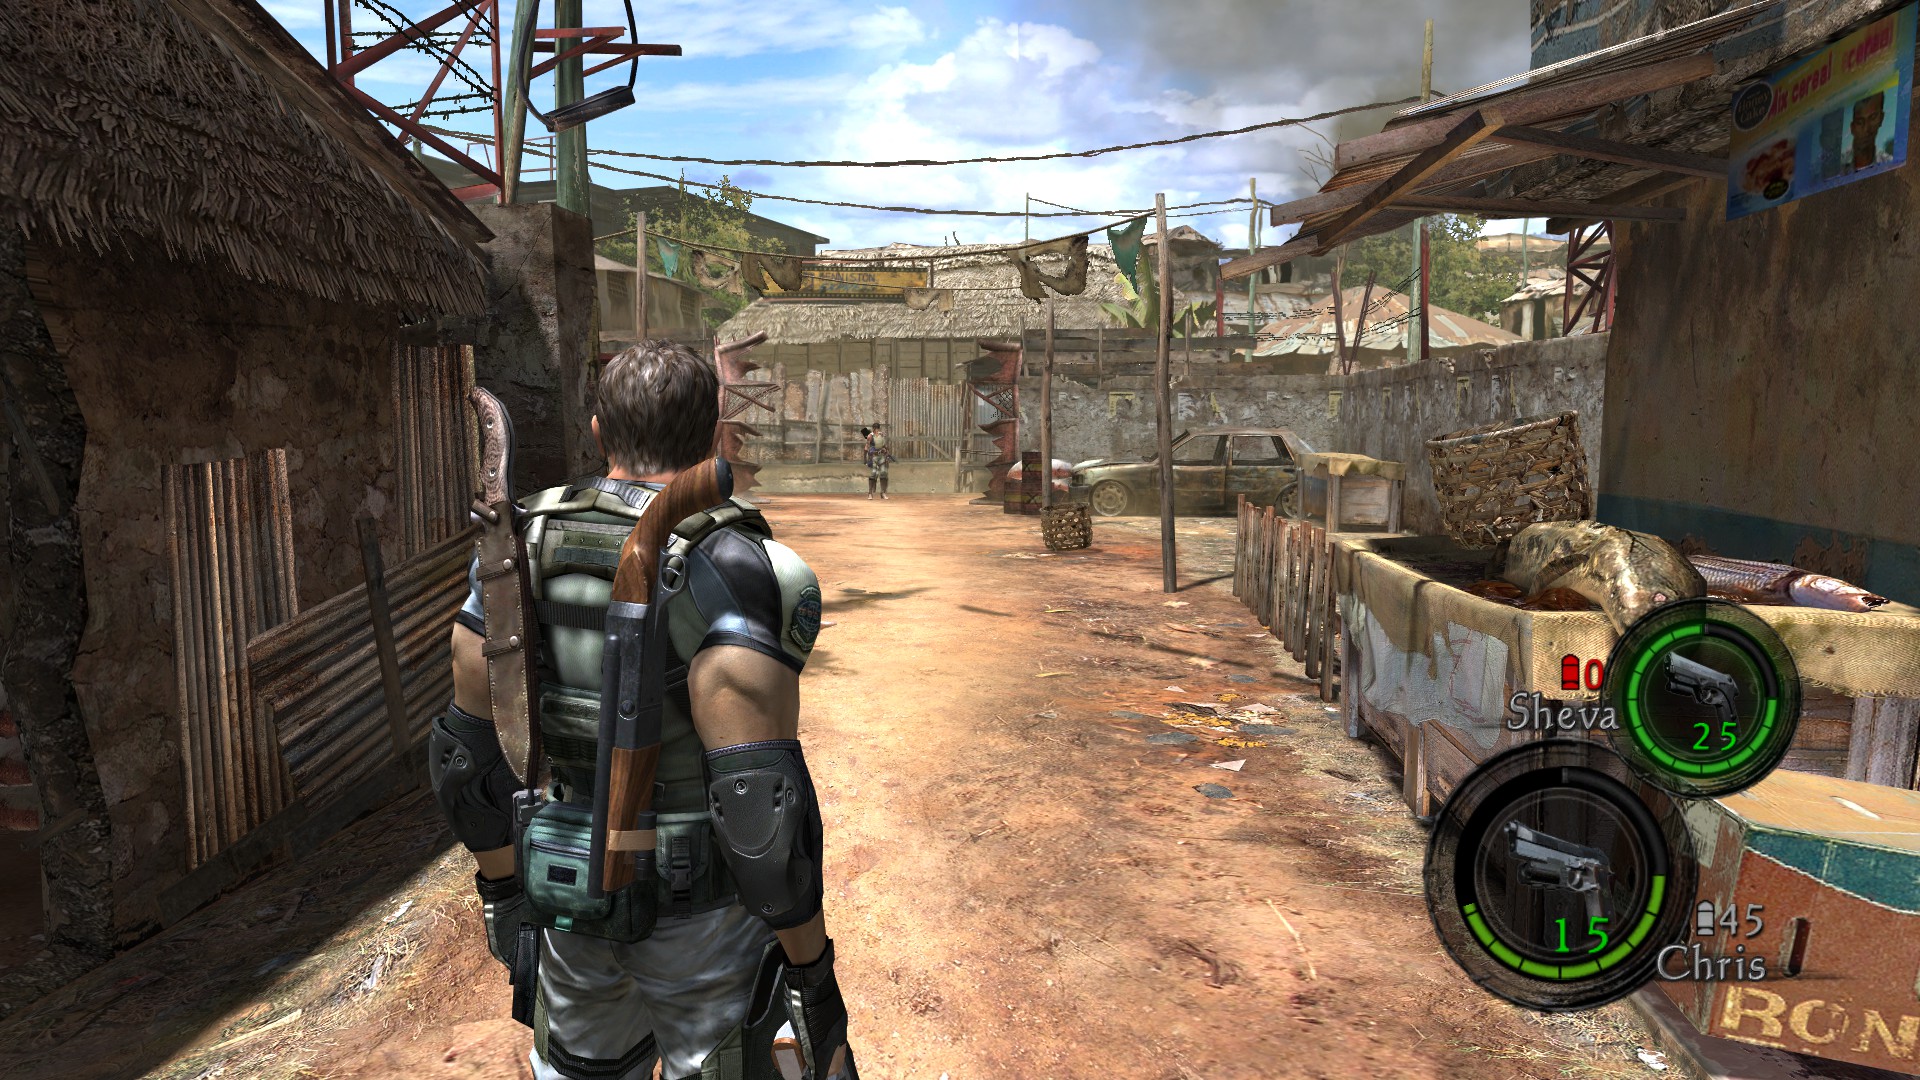 Resident Evil 5 Receives Surprise Patch After 13 Years